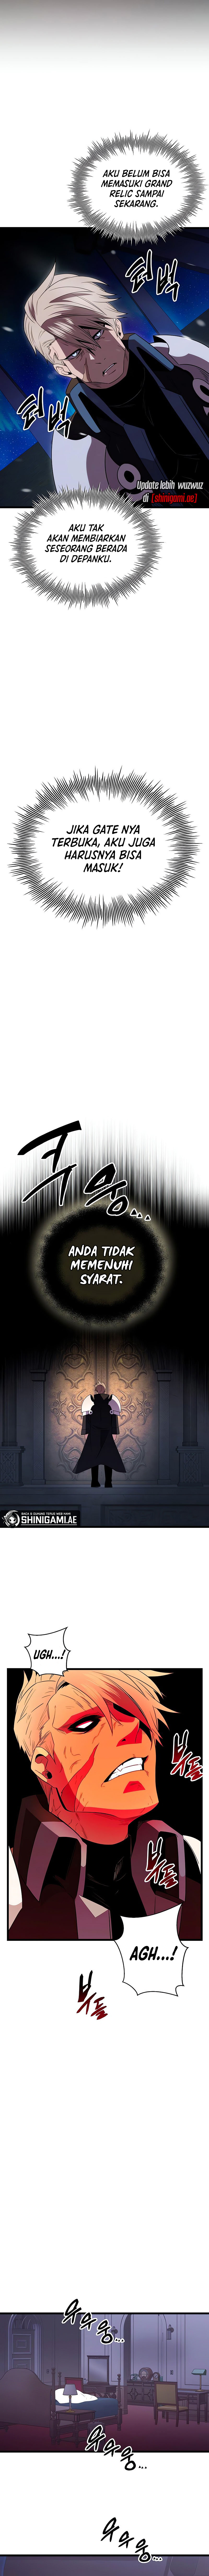 i-obtained-a-mythic-item Chapter 85